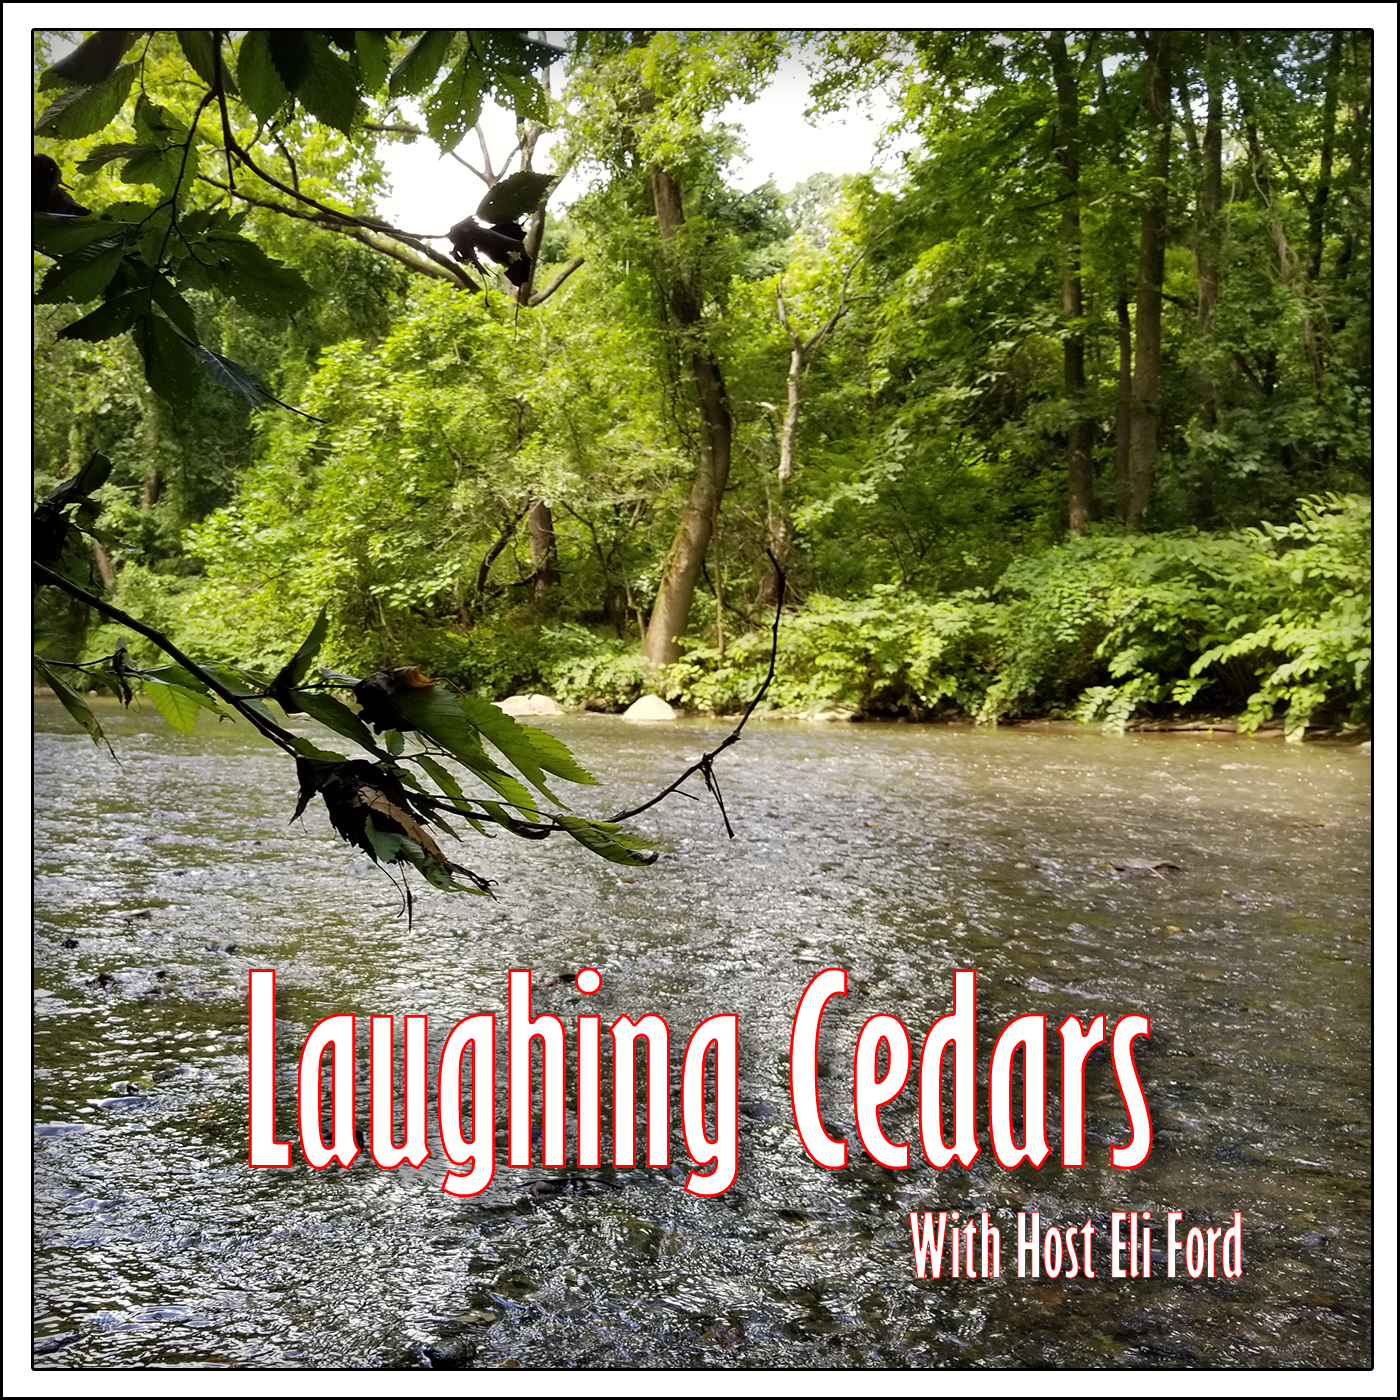 Mid-Season Chat and Laughing Cedars